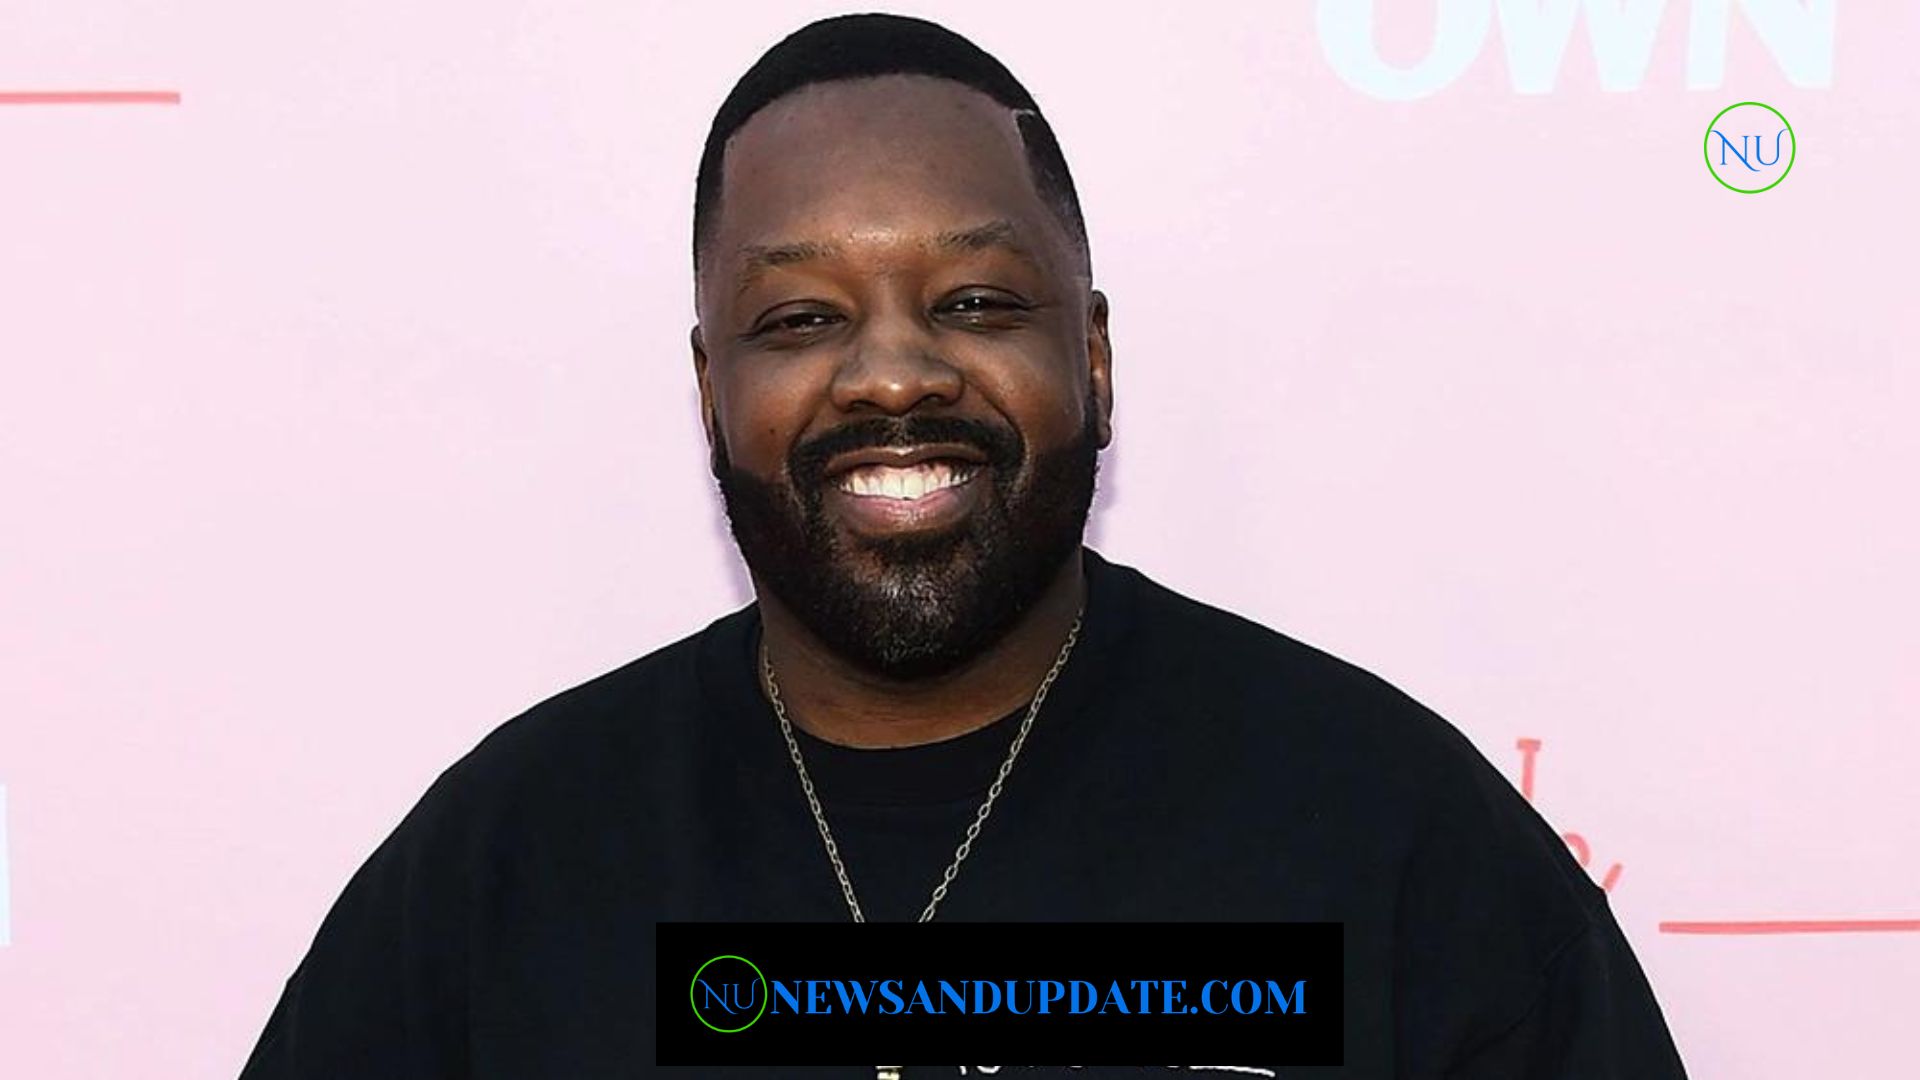 Who Is Kadeem Hardison? Know About His Personal & Professional Life!